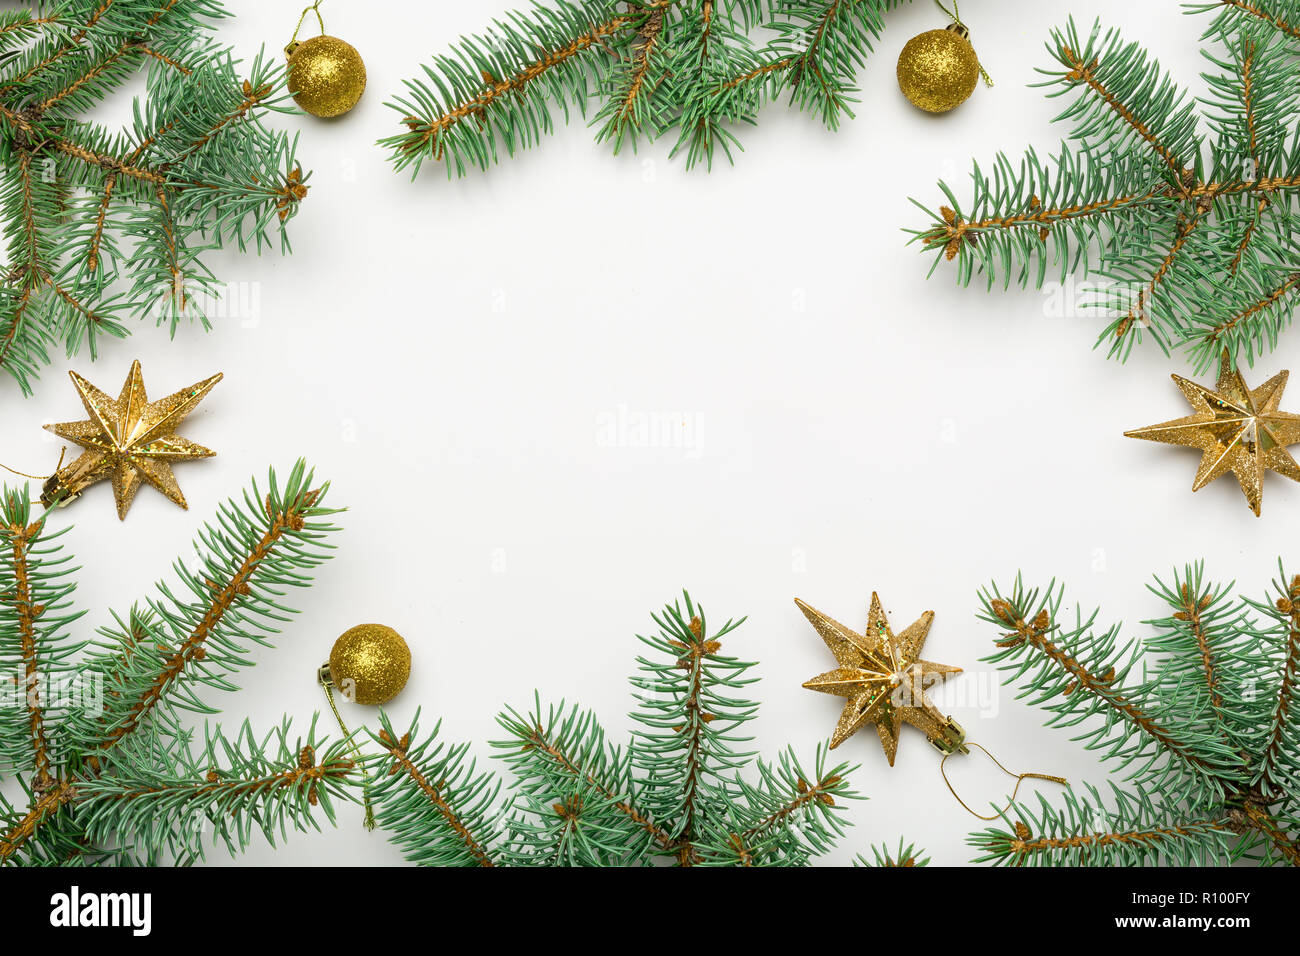 Holiday frame of Christmas decorations on white background with fir branch,  gold and red balls, stars. Elegant New Year`s snowy card Stock Photo - Alamy